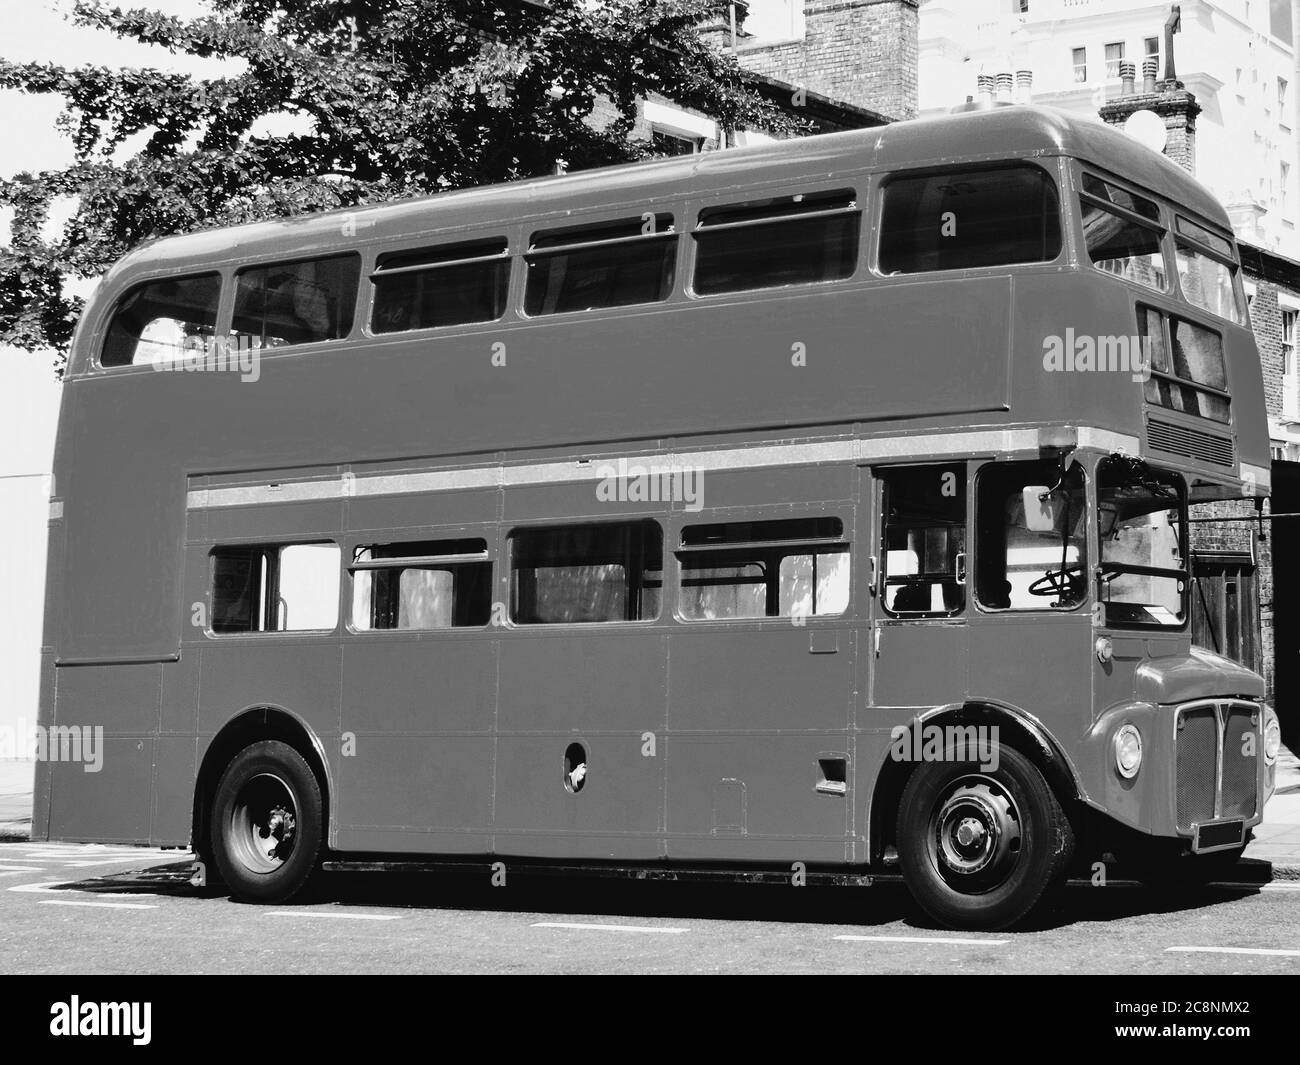 London Routemaster red double decker bus in London England UK black and white monochrome image stock photo Stock Photo